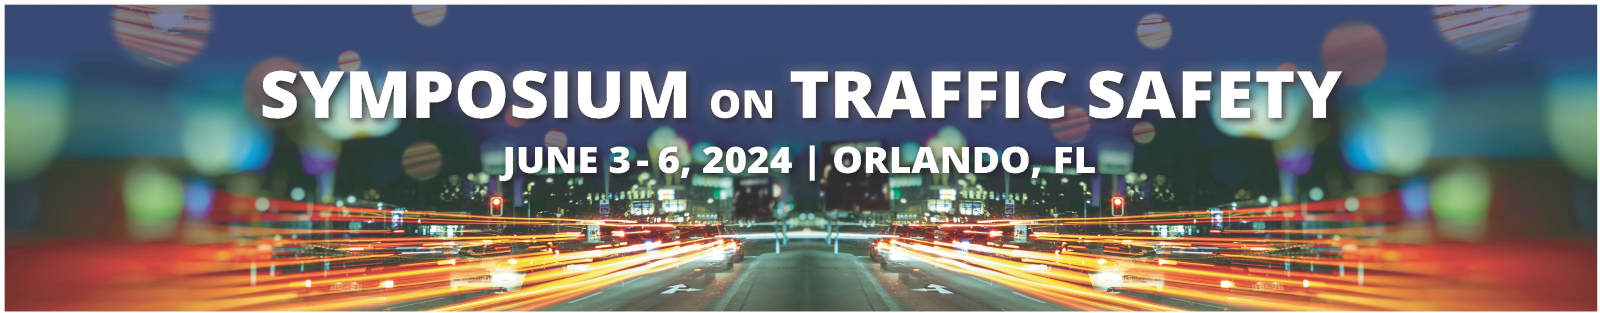 banner promoting the Symposium on Traffic Safety on June 3-6 in Orlando